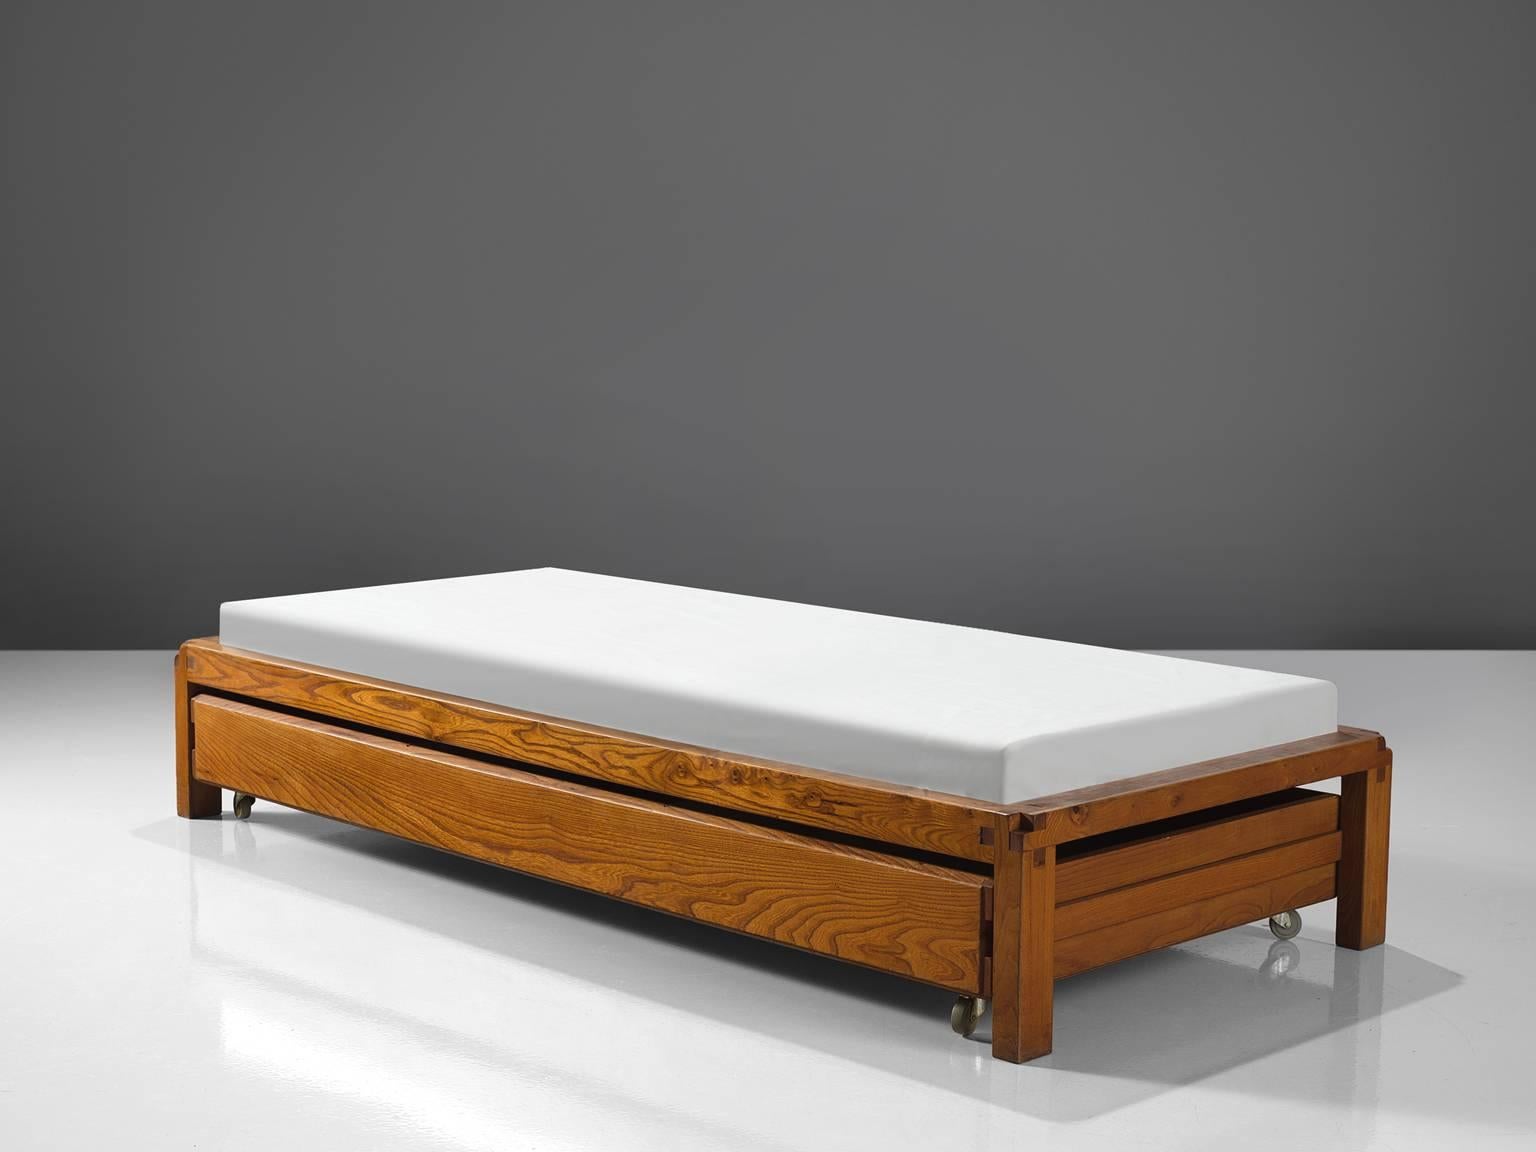 Pierre Chapo, bed with drawer, model L03, France, ca. 1965. 

This bed is designed by Pierre Chapo in 1965. The bed has storage underneath in the shape of a large drawers with wheels. The bed features the hand-crafted joints that the woodworker